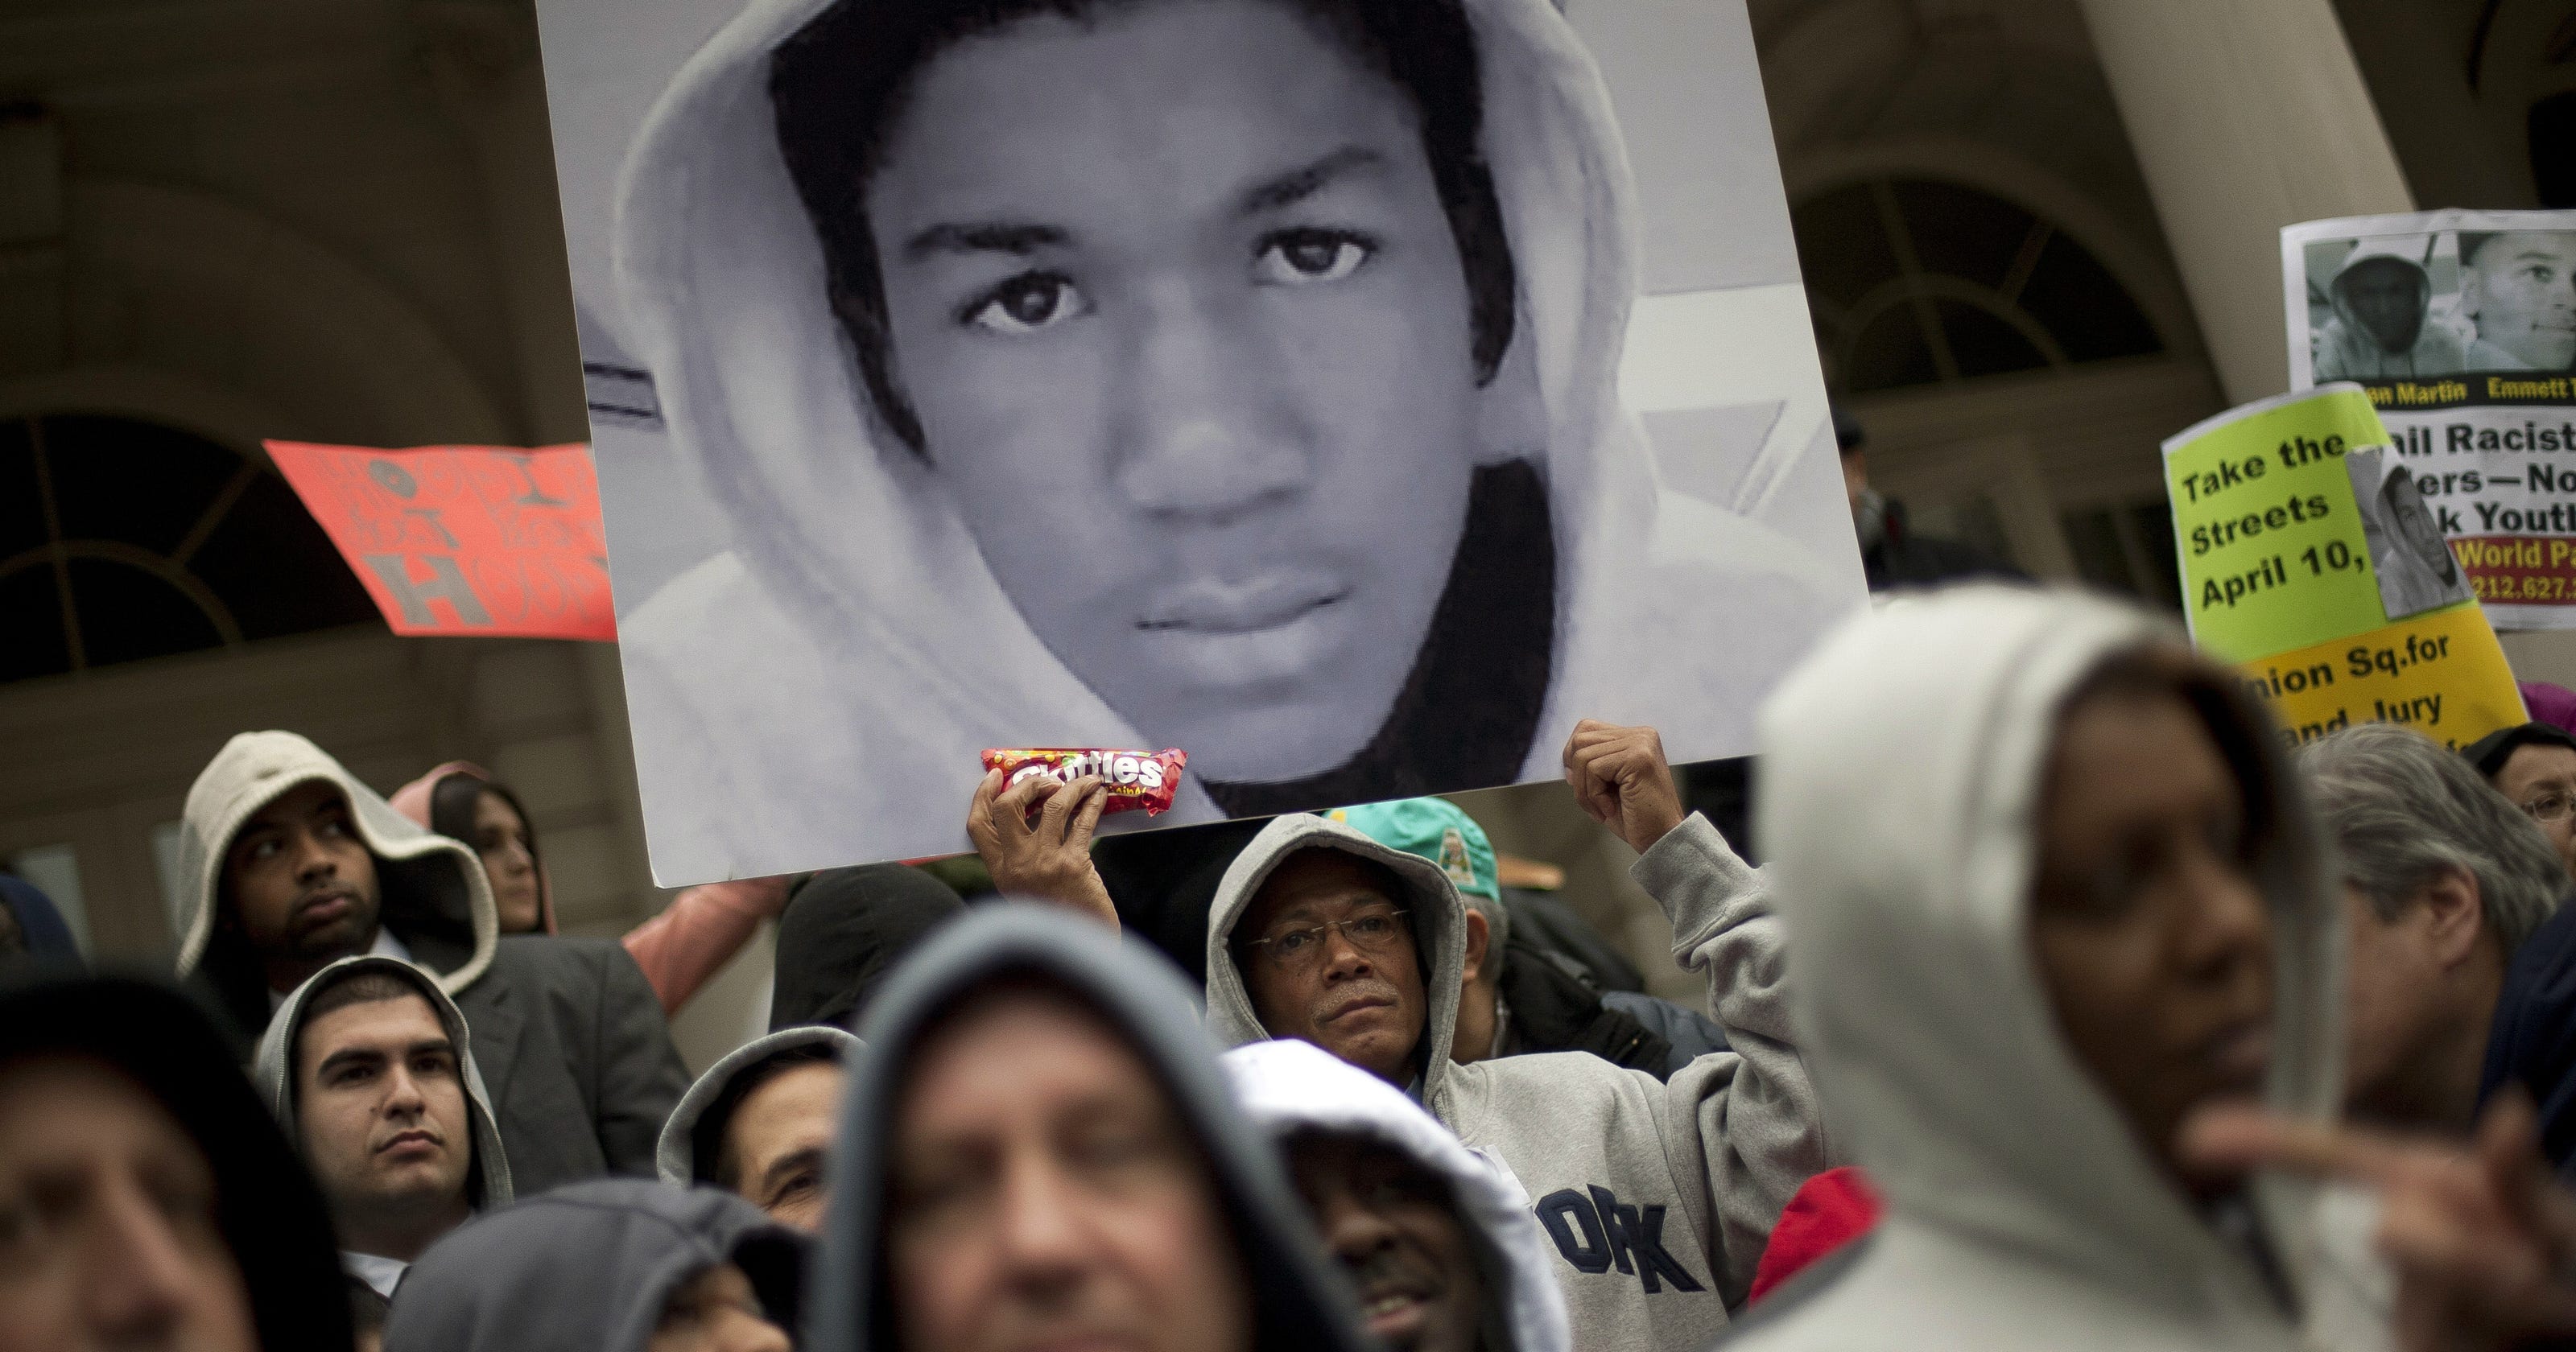 Trayvon Martin: Typical teen or troublemaker?3200 x 1680